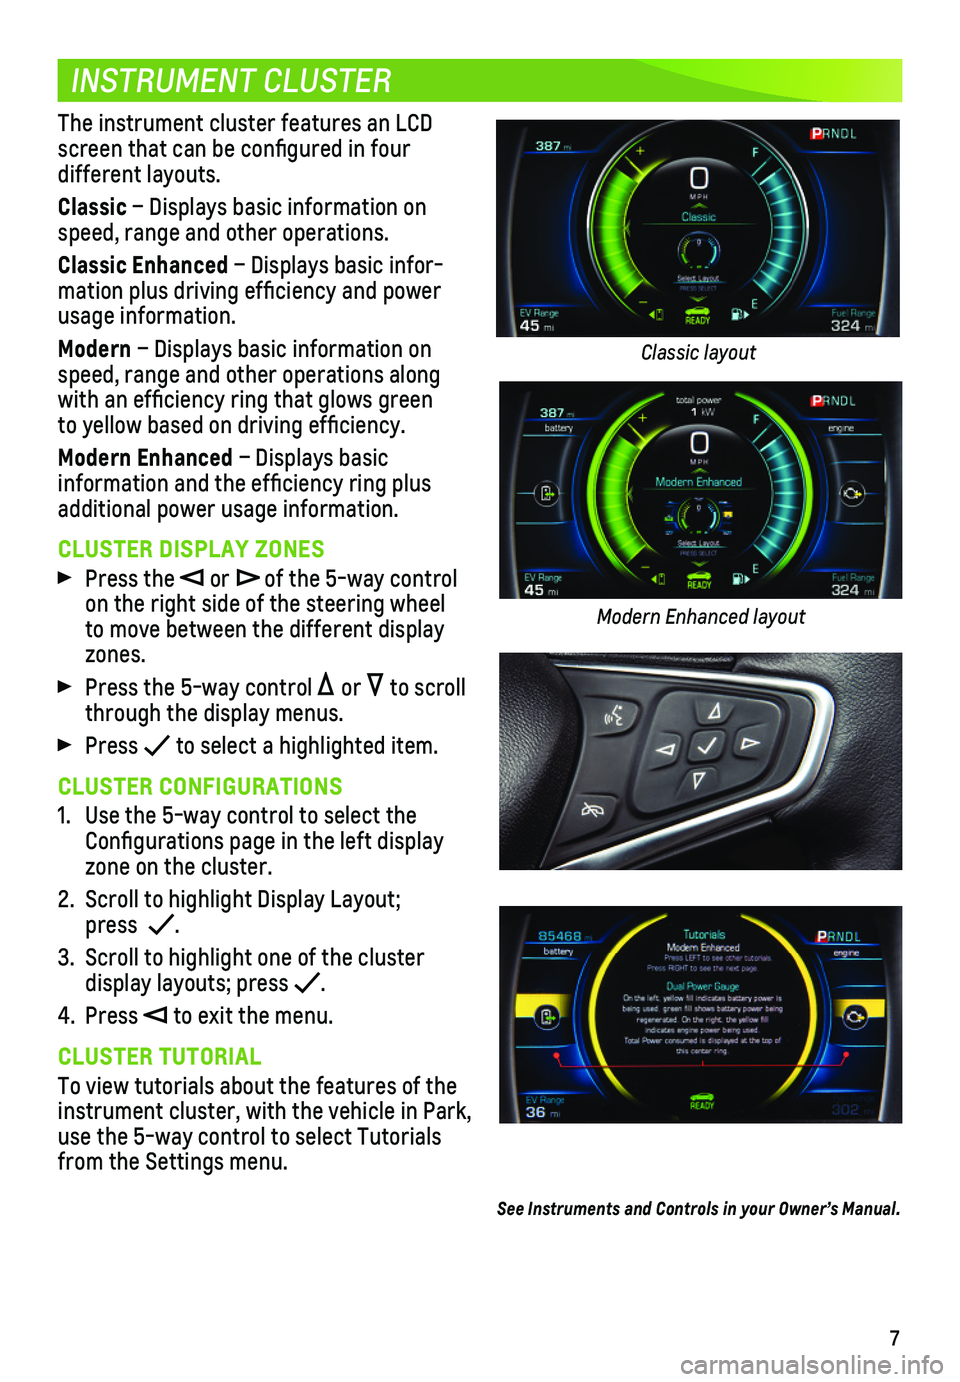 CHEVROLET VOLT 2018  Get To Know Guide 7
INSTRUMENT CLUSTER
The instrument cluster features an LCD screen that can be configured in four  different  layouts.
Classic – Displays basic information on speed, range and other operations. 
Cla